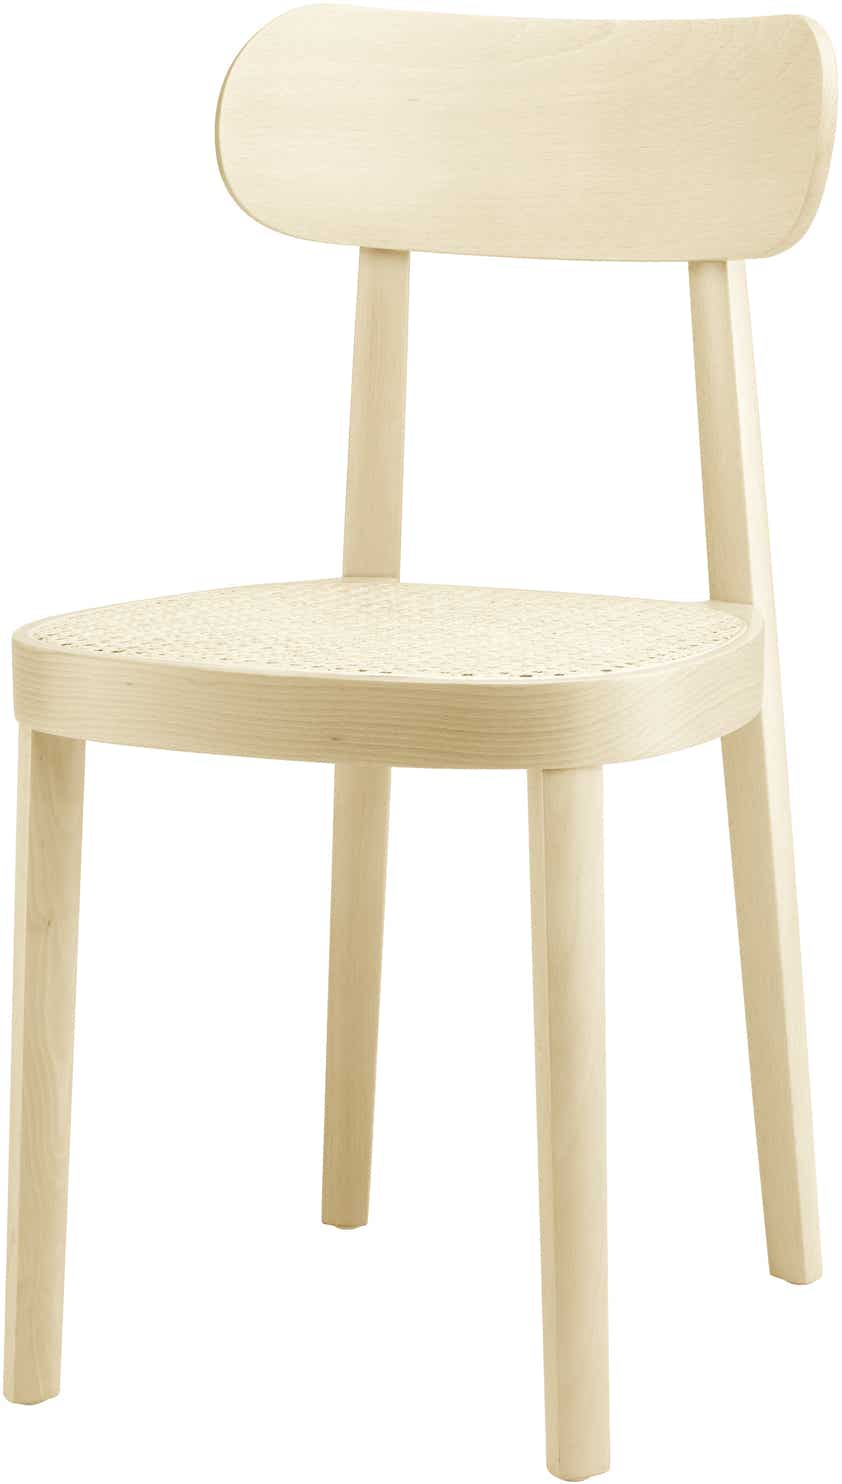 118 / 118 F chair (cane seat) Brightened beech